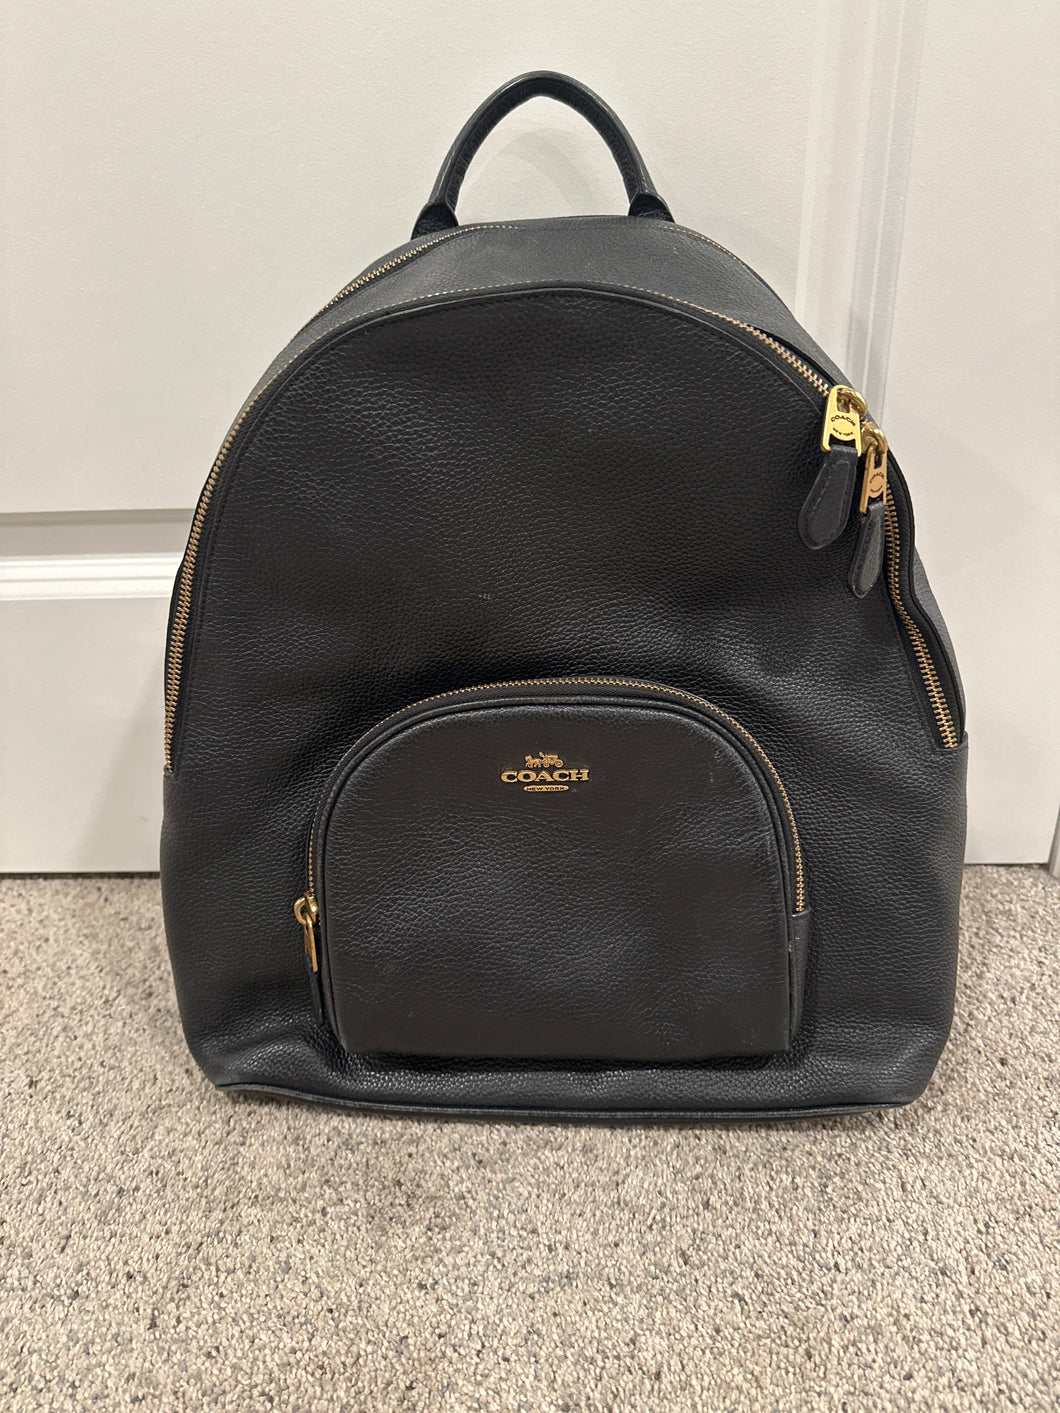 Coach black leather backpack